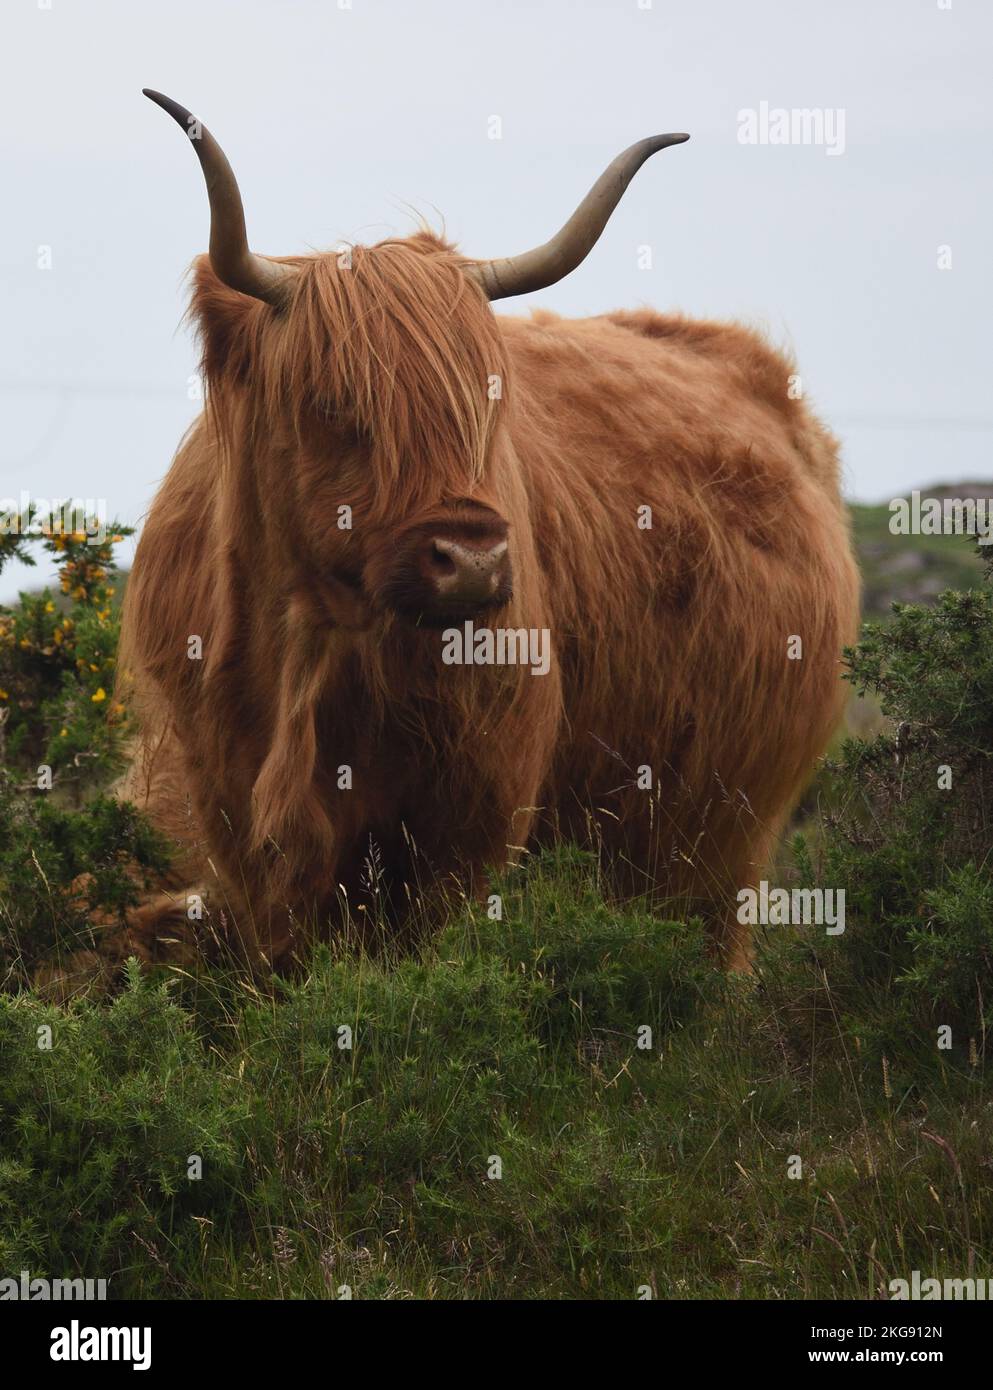 Highland cattle on the isle of Mull Scotland close up of cow in a field with Gorse in background. Showing large horns and shaggy fur with hair in eyes Stock Photo